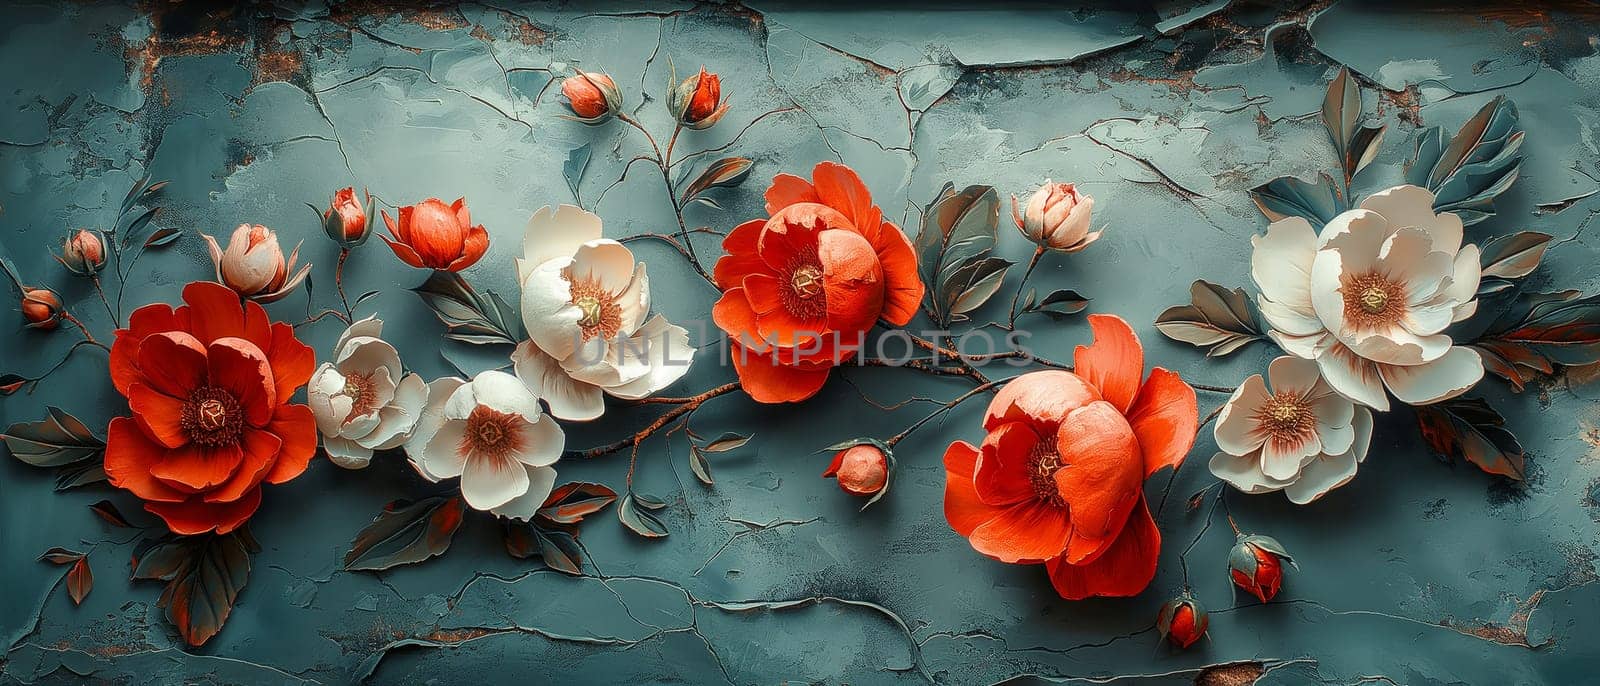 Vintage painting depicting large flowers with delicate leaves. Selective soft focus.